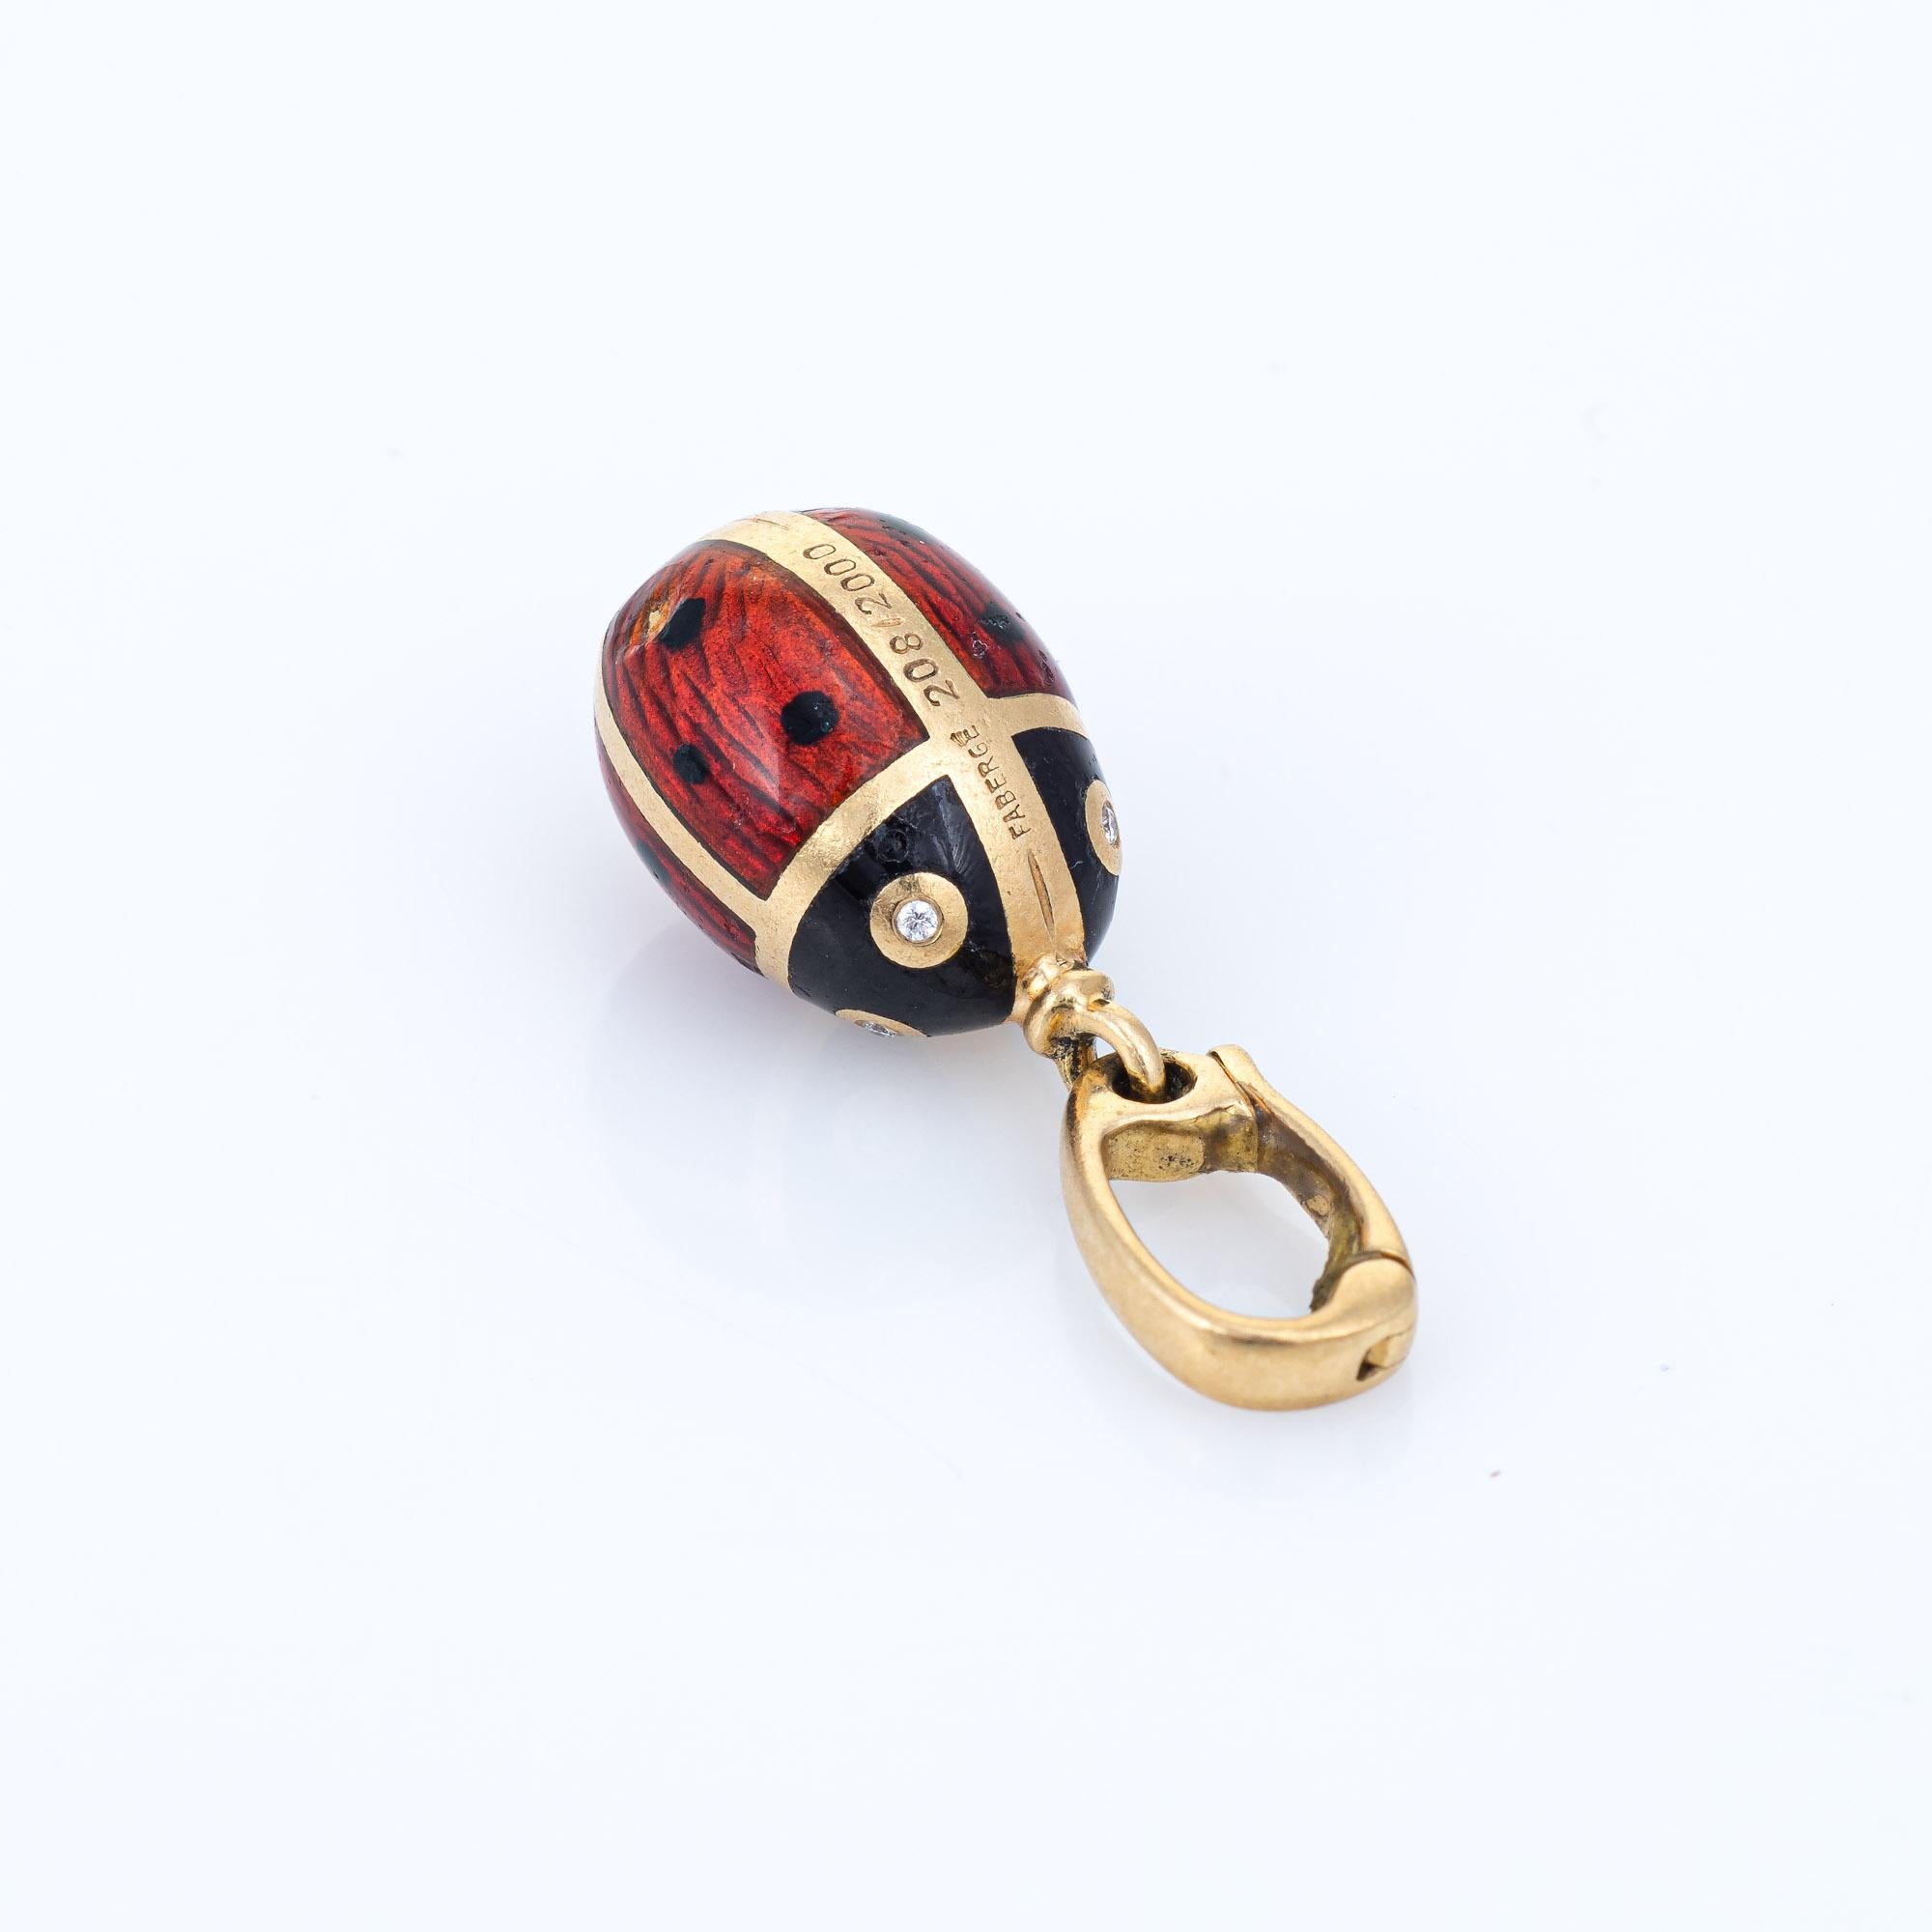 Sweet Faberge ladybug charm crafted in 18 karat yellow gold.  

Diamonds total an estimated 0.02 carats (estimated at G-H color and VS2 clarity). 

The ladybug is beautifully enameled in red and black, with diamond set eyes (both sides). Also